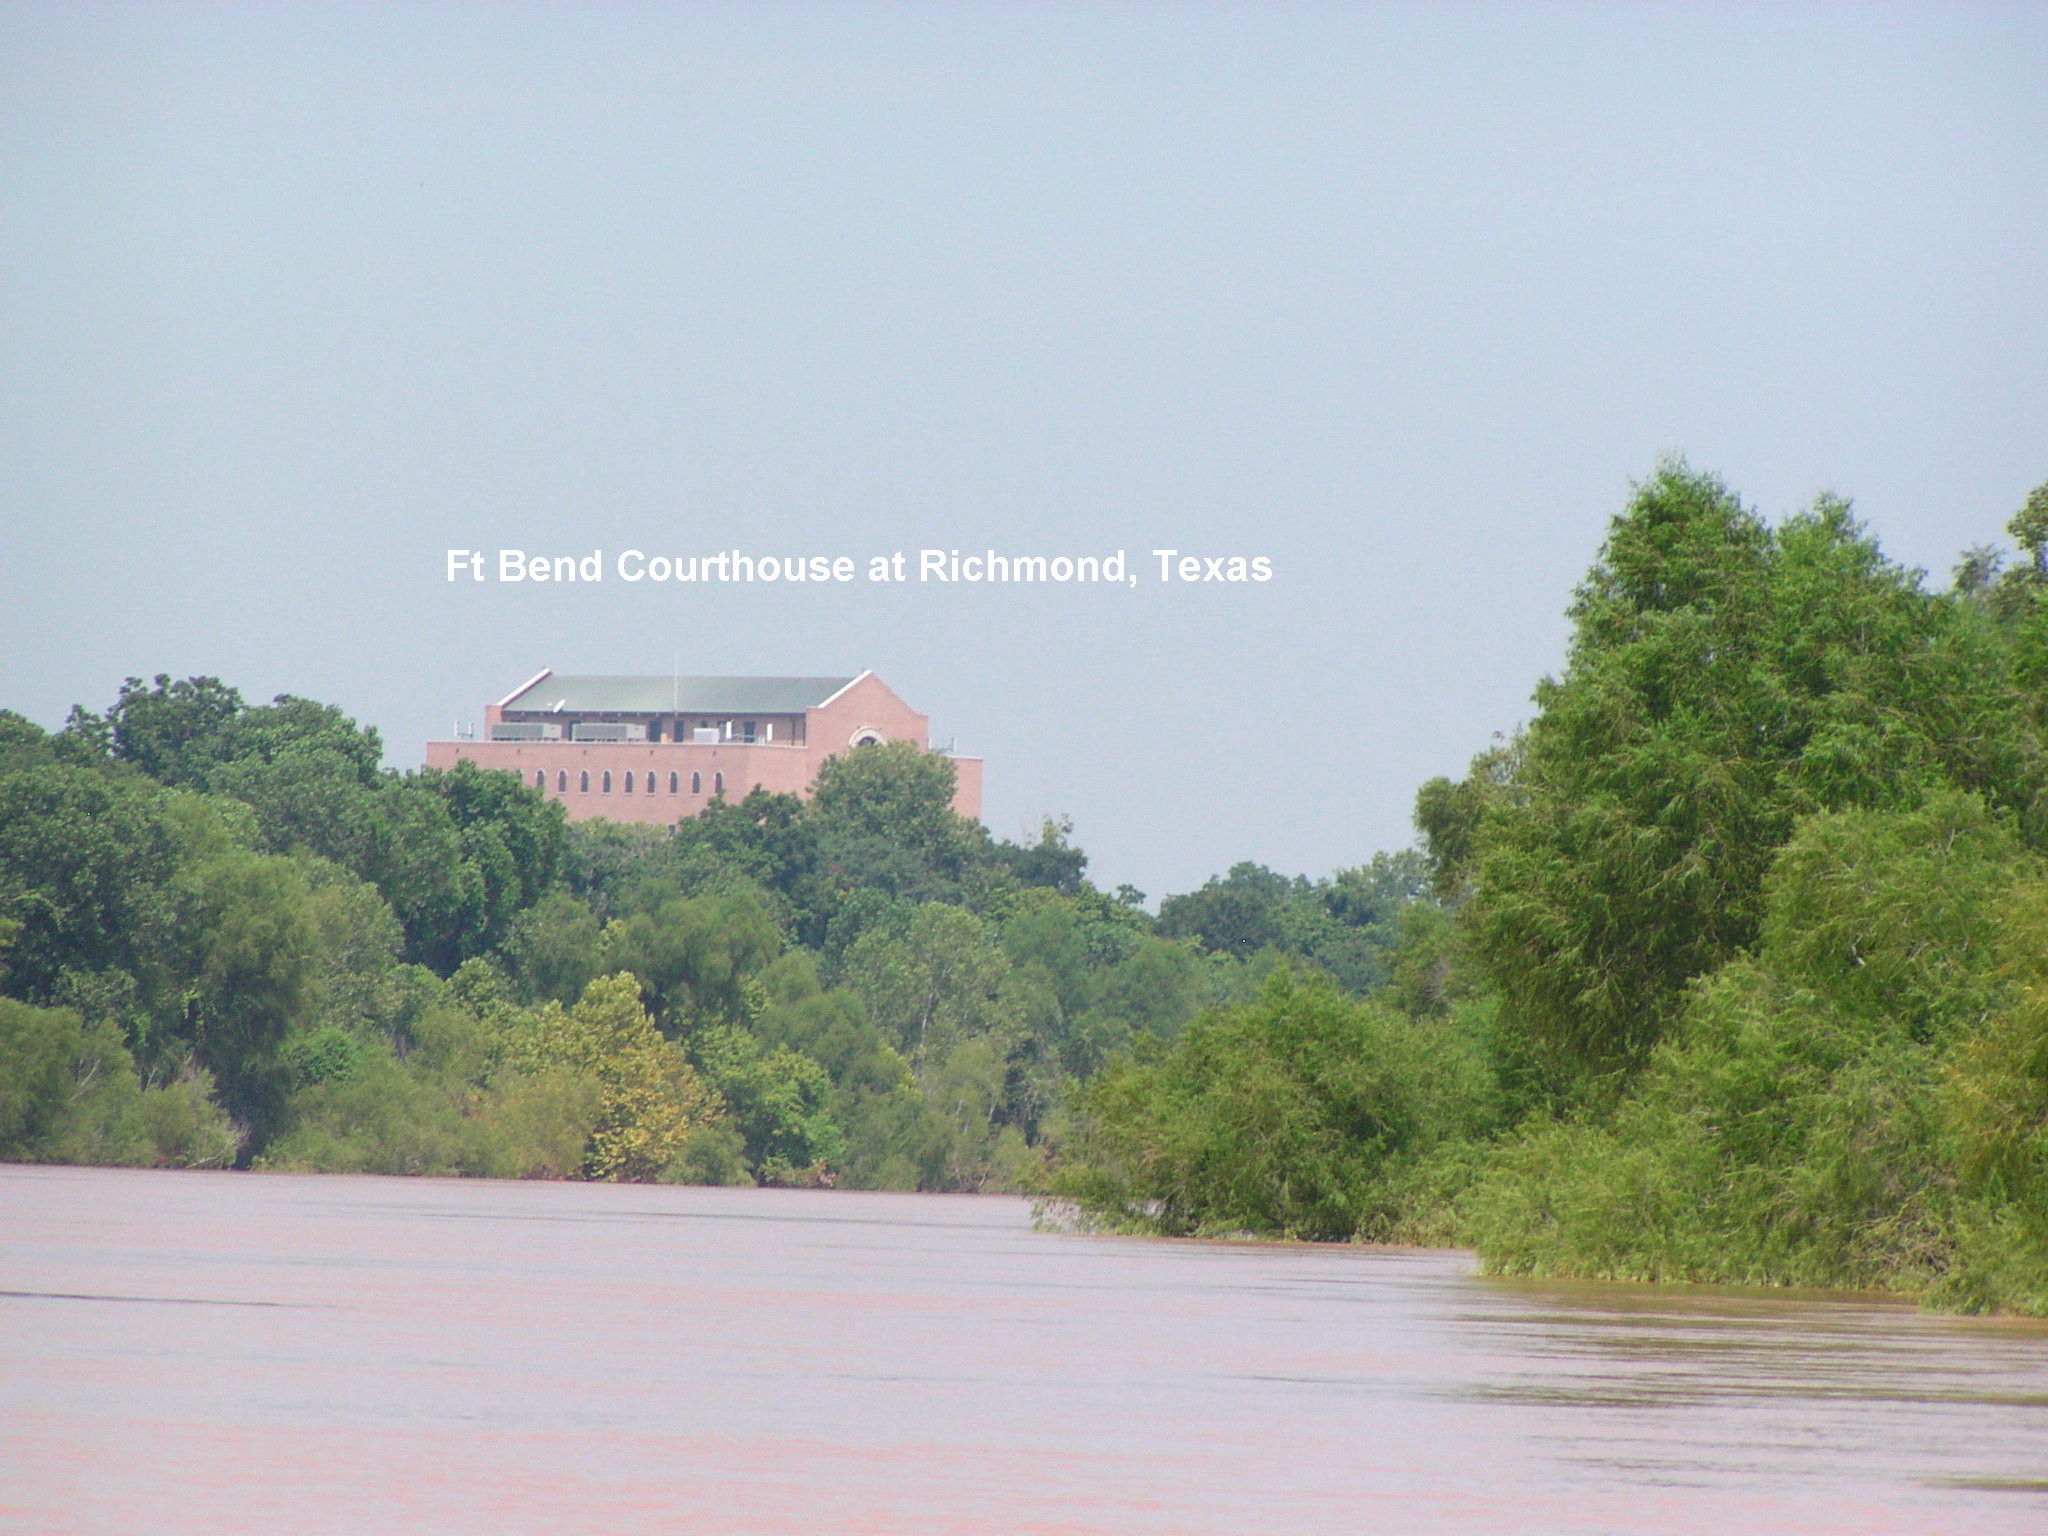 The new court house at Richmond. This is about 25 miles upstream from Miller Rd.